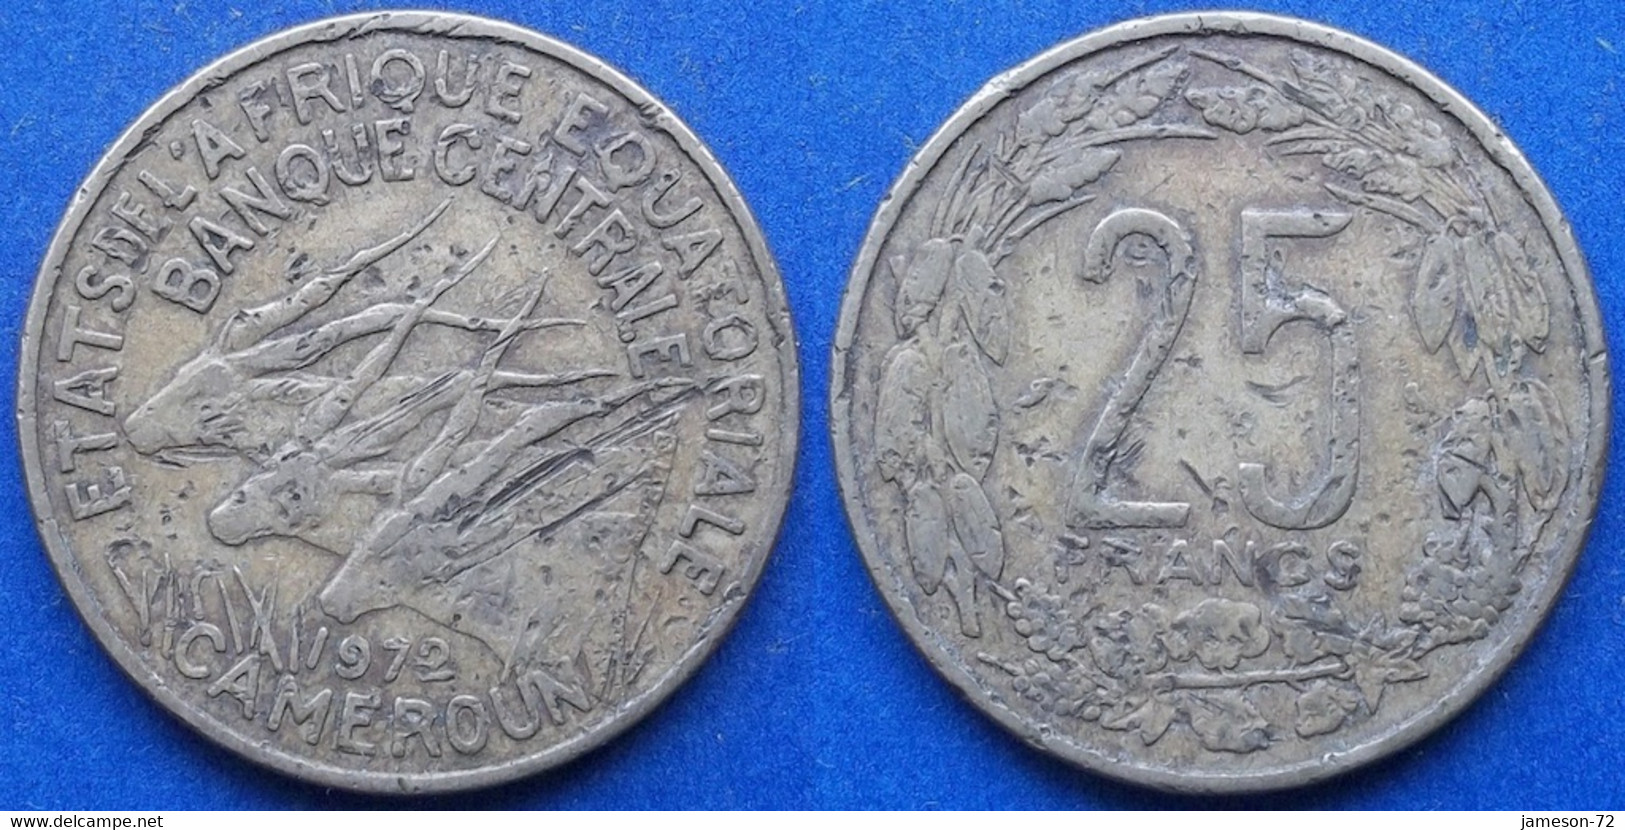 CAMEROON · EQUATORIAL AFRICAN STATES - 25 Francs 1972 KM# 4a Independent Republic (1960) - Edelweiss Coins - Cameroun